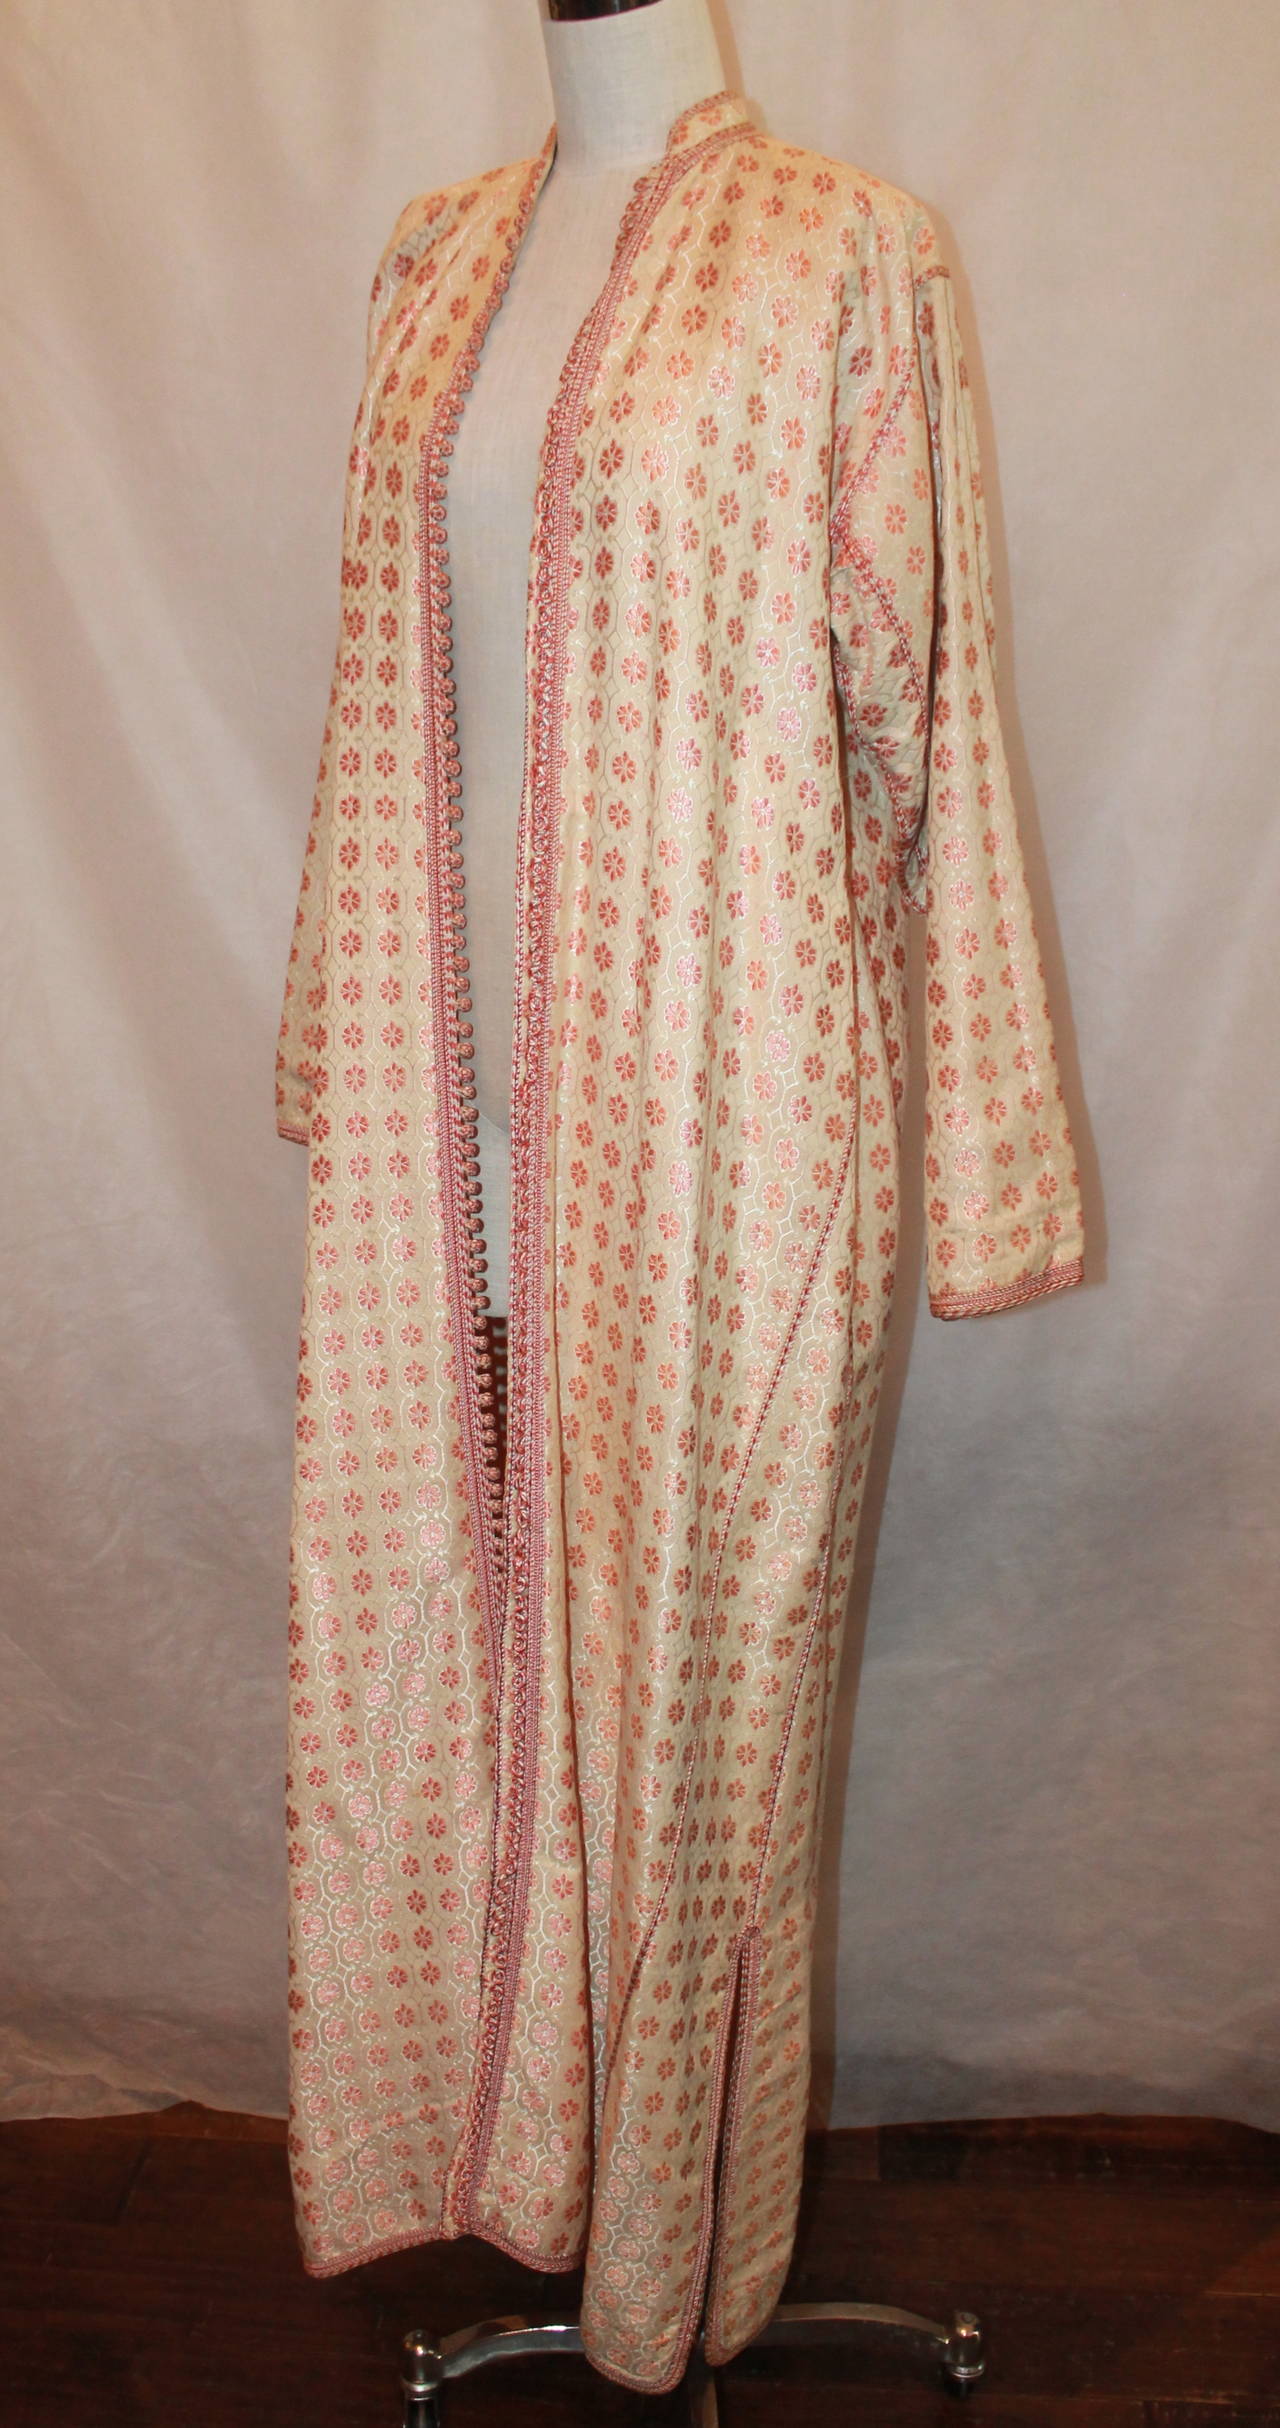 1960's Vintage Creme & Coral Silk Brocade Asian Coat. This coat is in good vintage condition with most of the wear being out of sight on the inside lining. There are stains on the lining seen on images 6-9. The only prominent wear visible on the